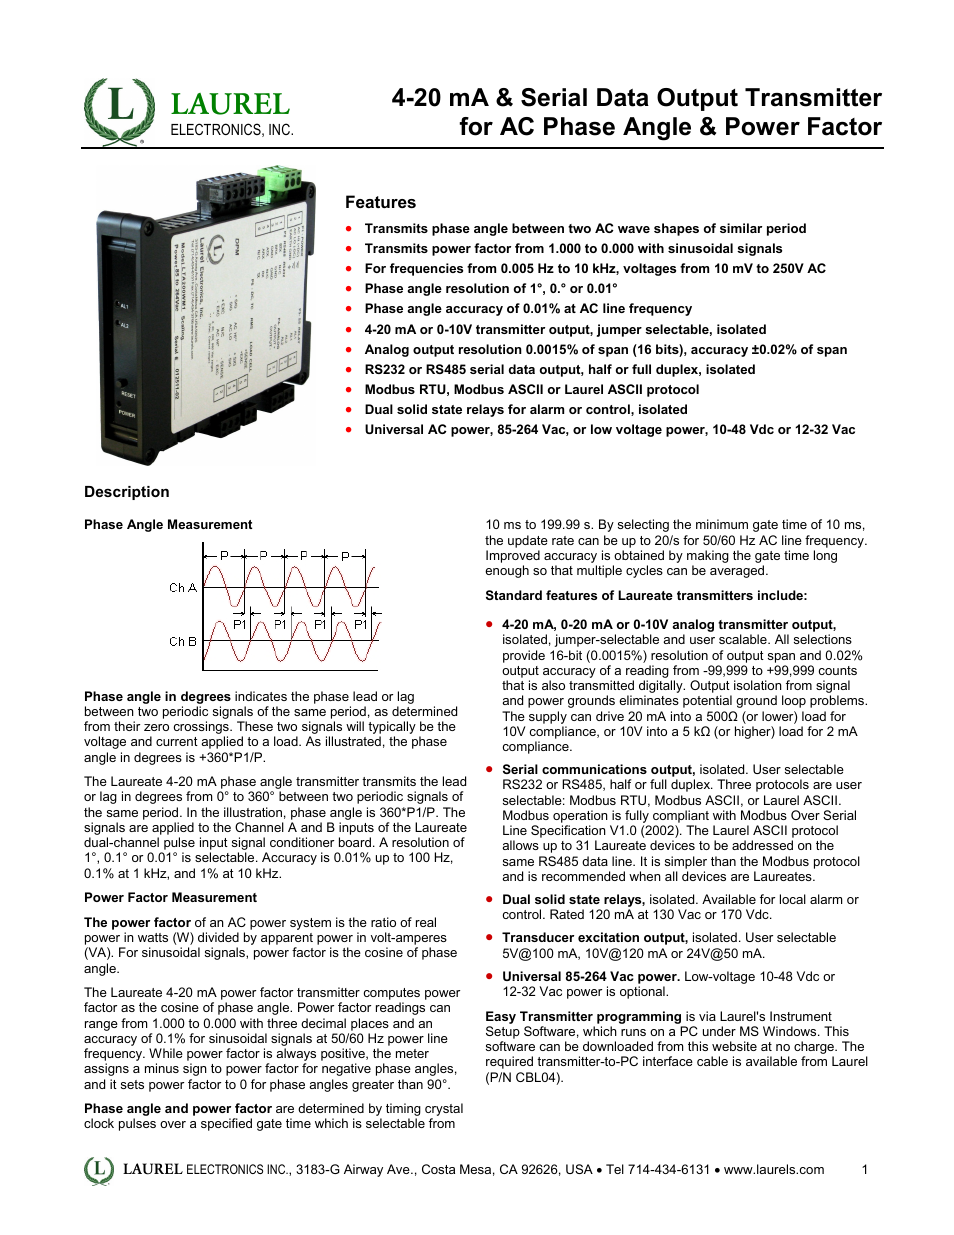 LT: 4-20 mA & Serial Data Output Transmitter for AC Phase Angle & Power Factor